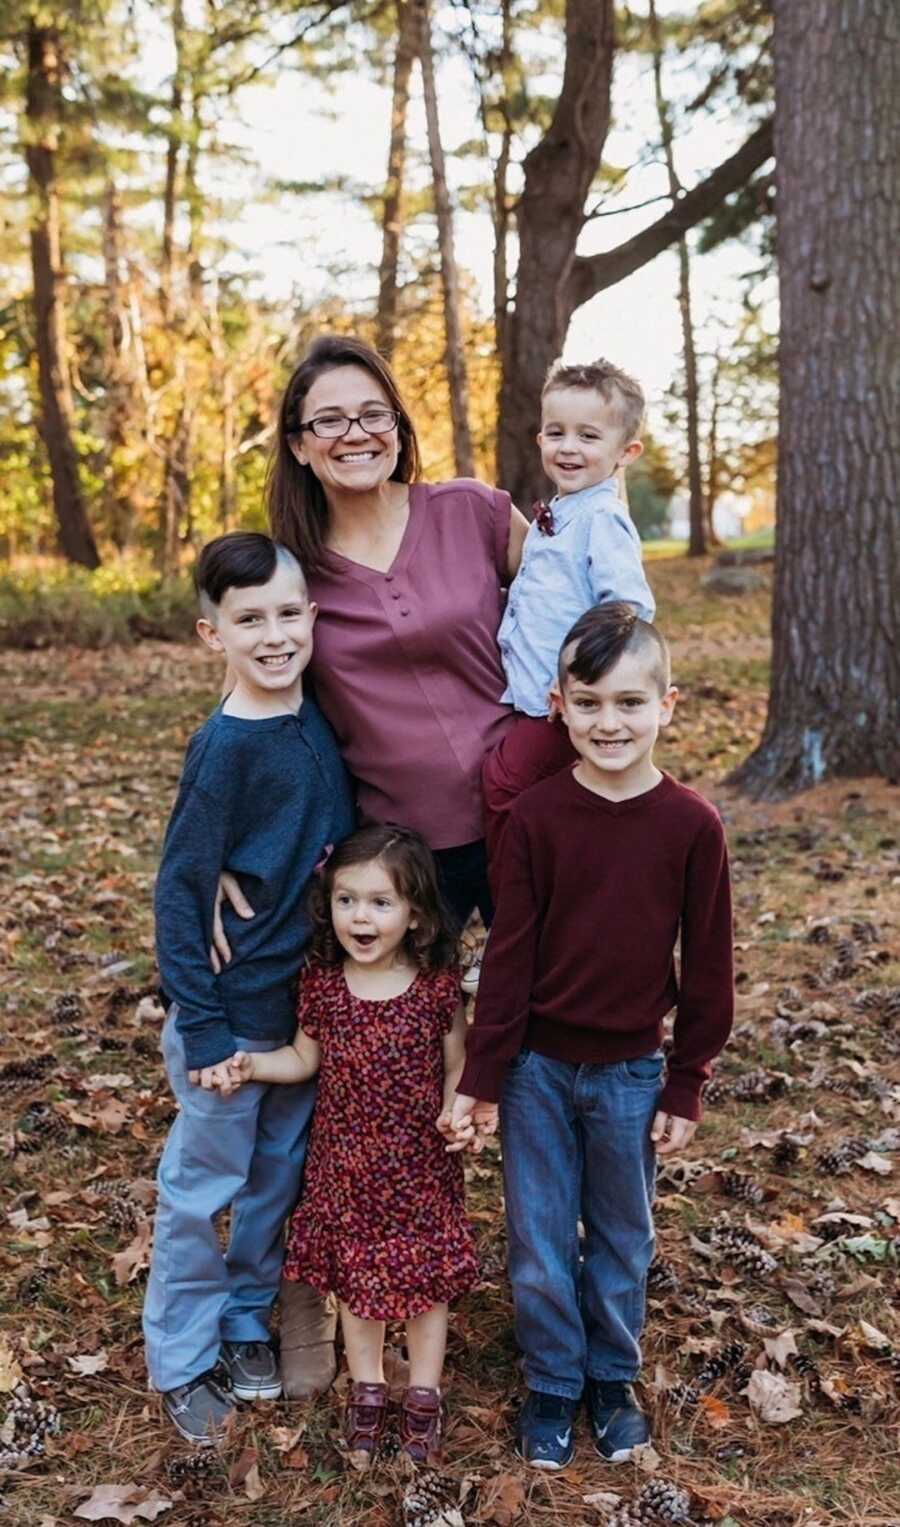 Mom stands with her 4 children